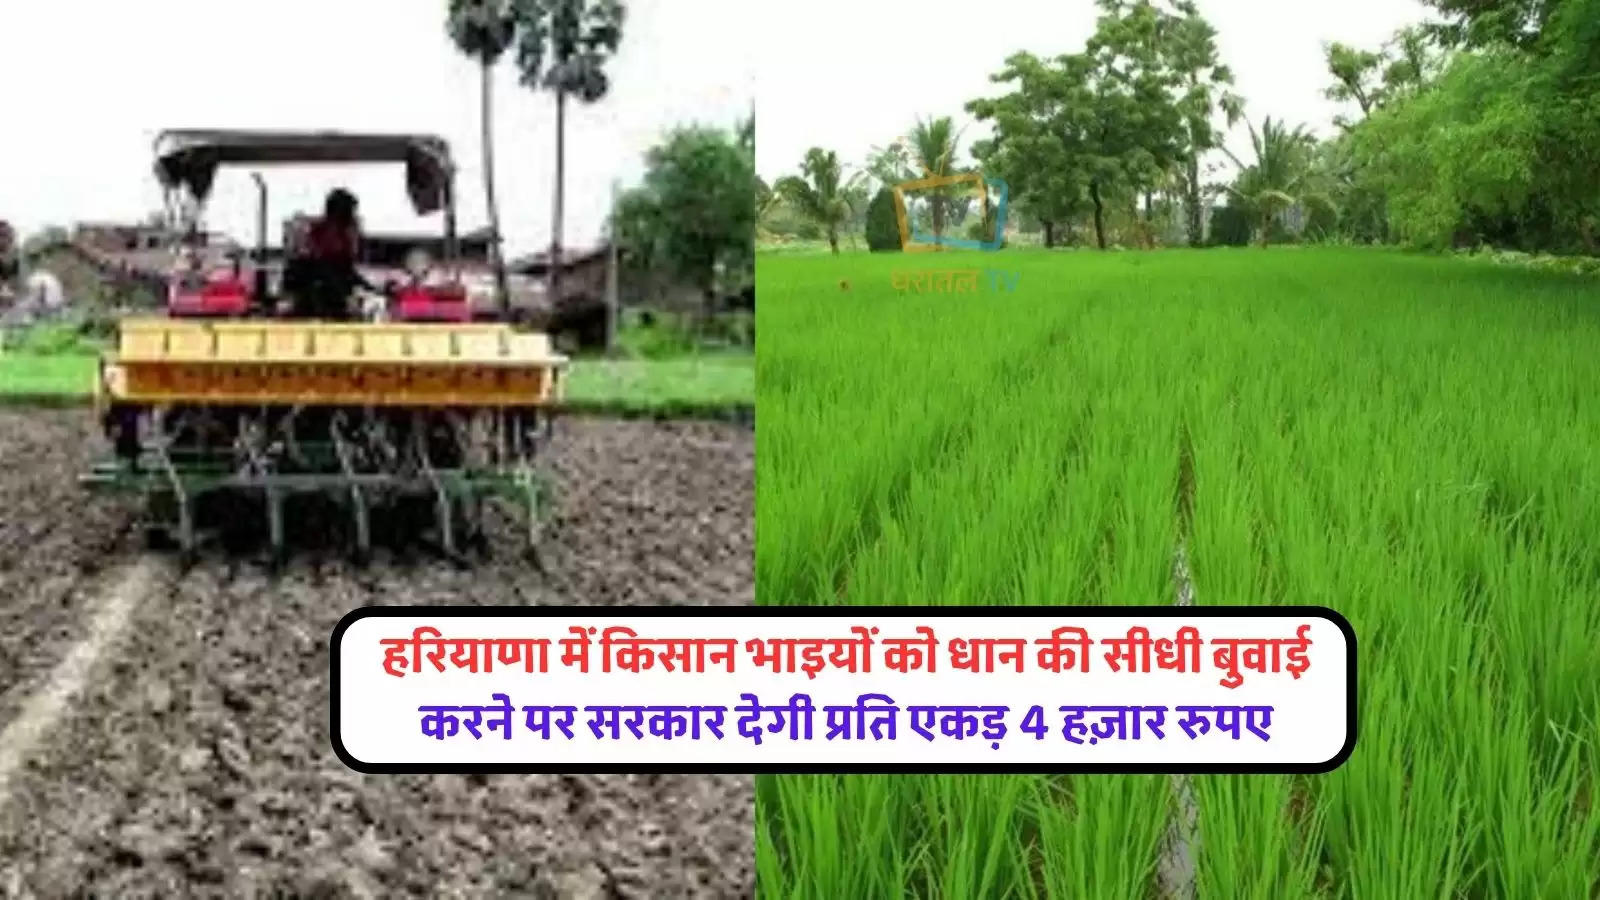 direct-sowing-of-paddy-in-haryana-will-get-4-thousand-rupees-per-acre